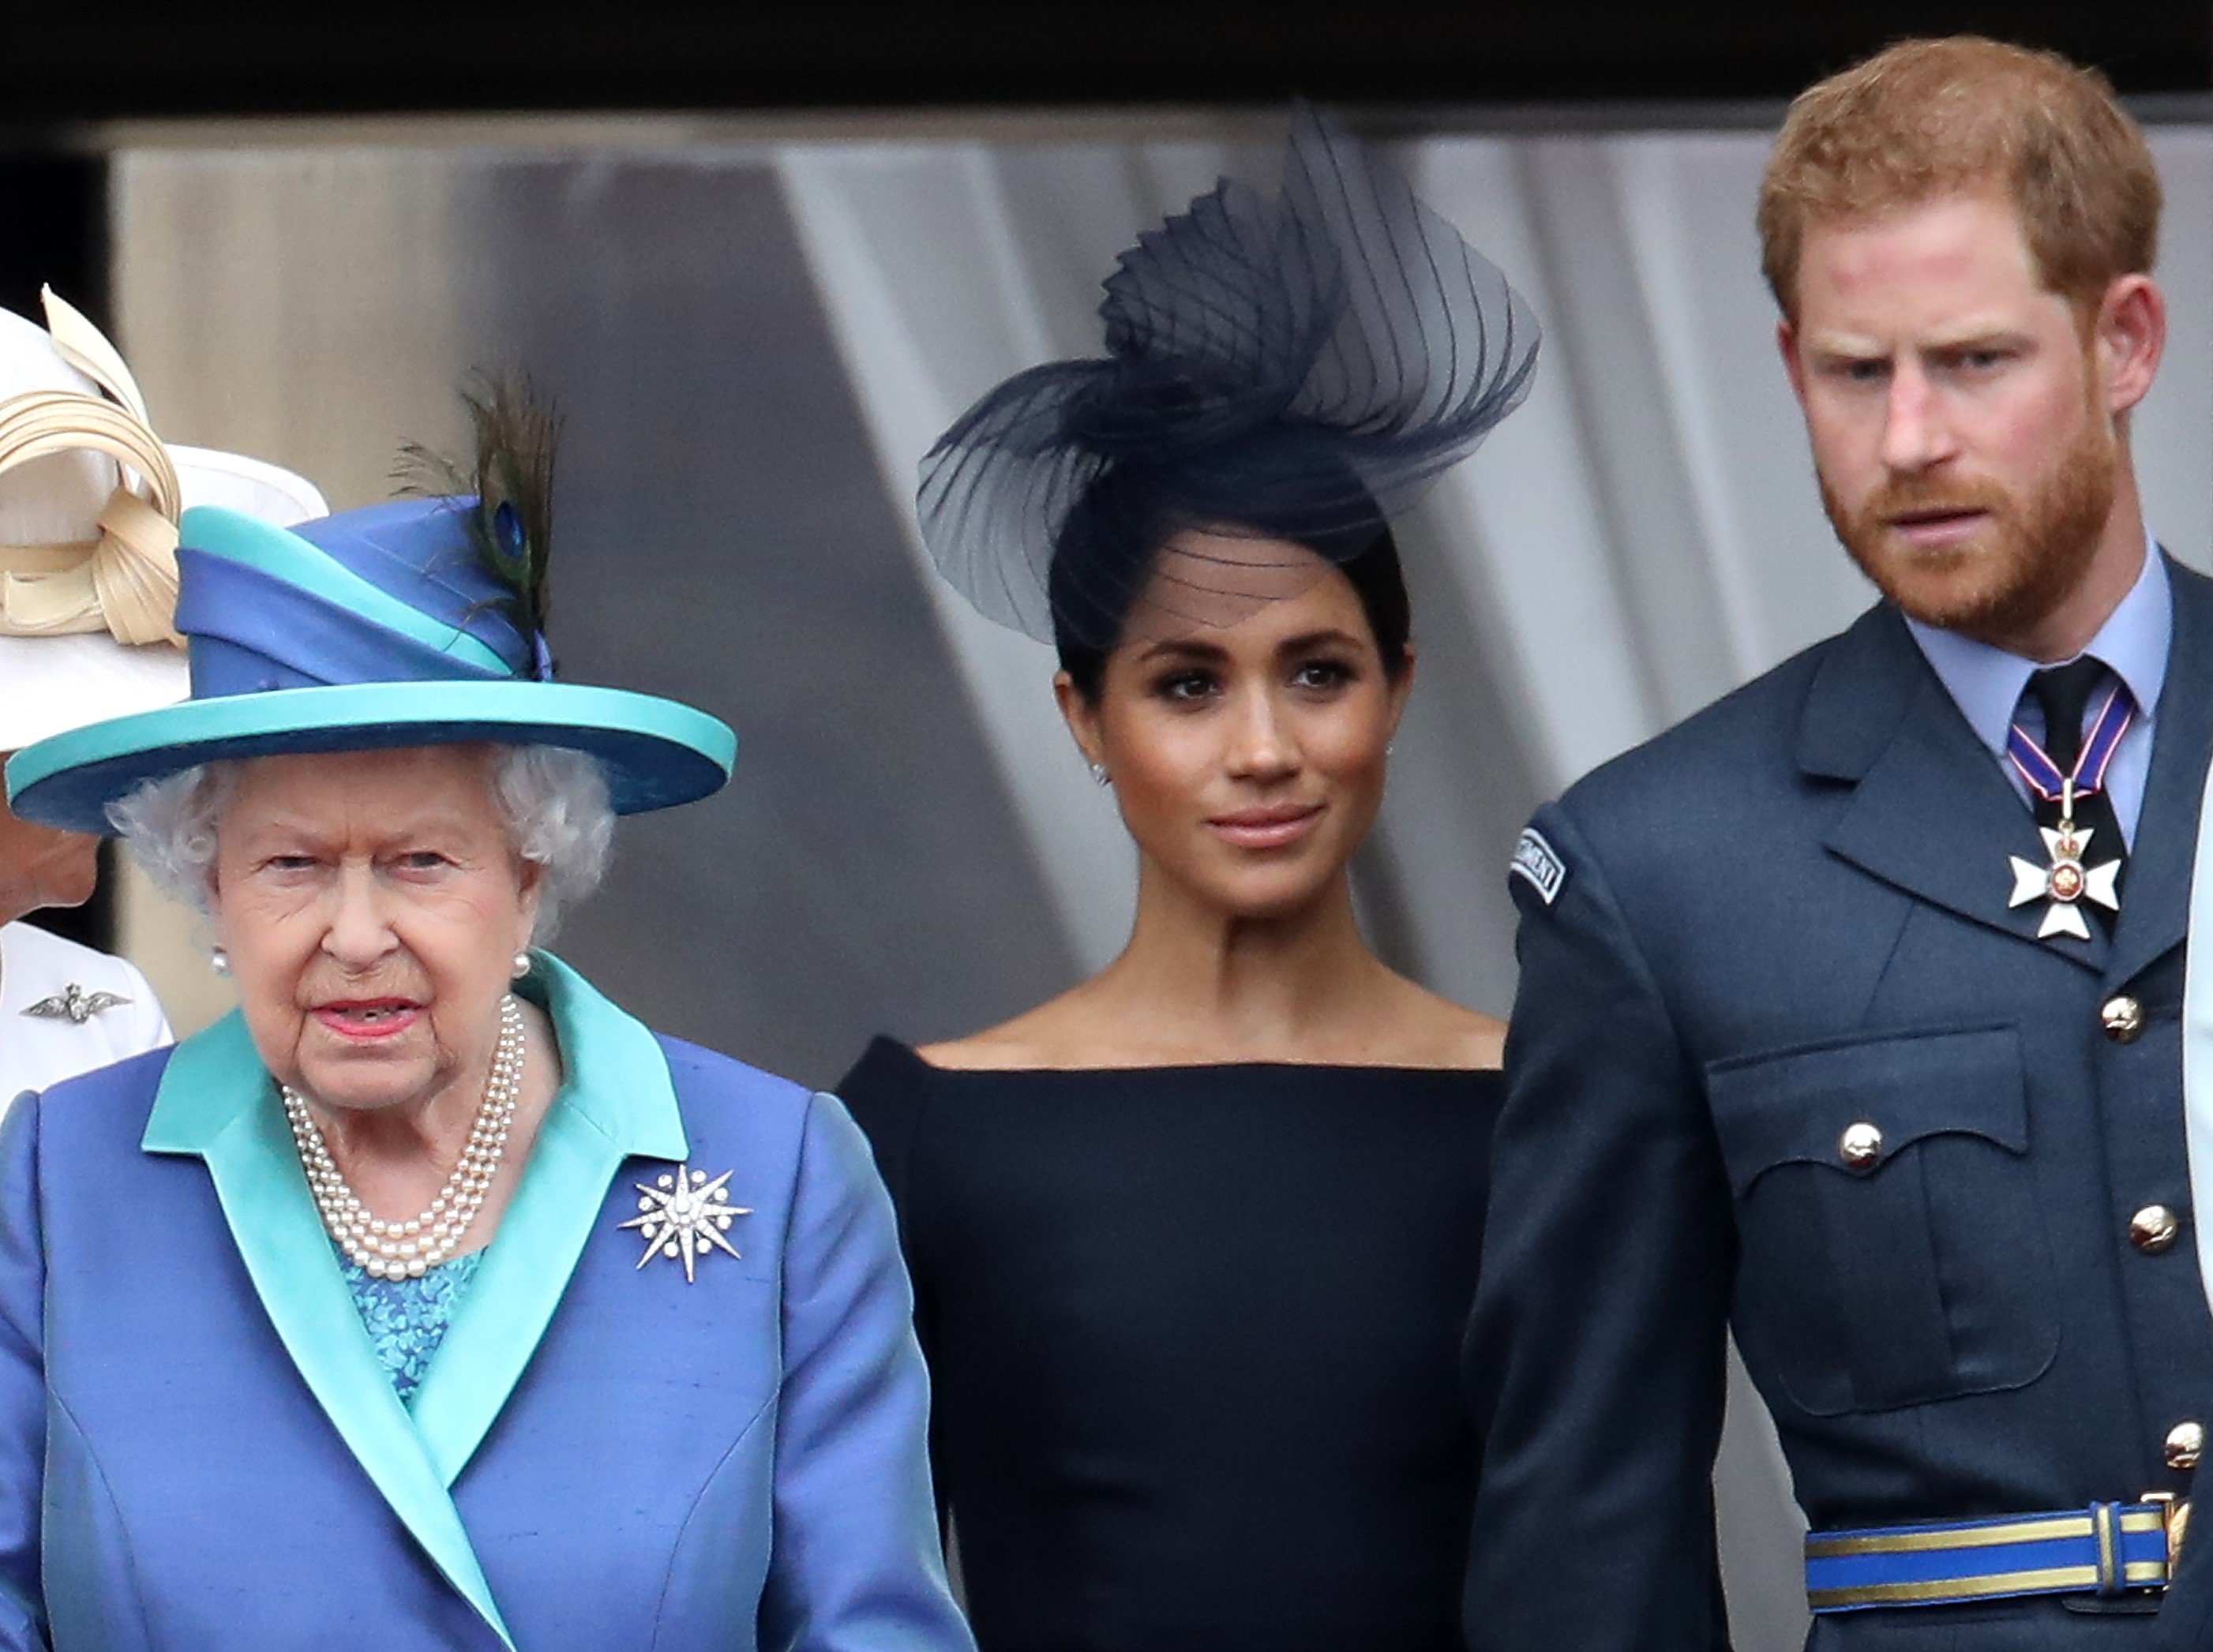 Queen Elizabeth II, Prince Harry, and Meghan Markle standing on the balcony of Buckingham Palace to mark the Centenary of the RAF